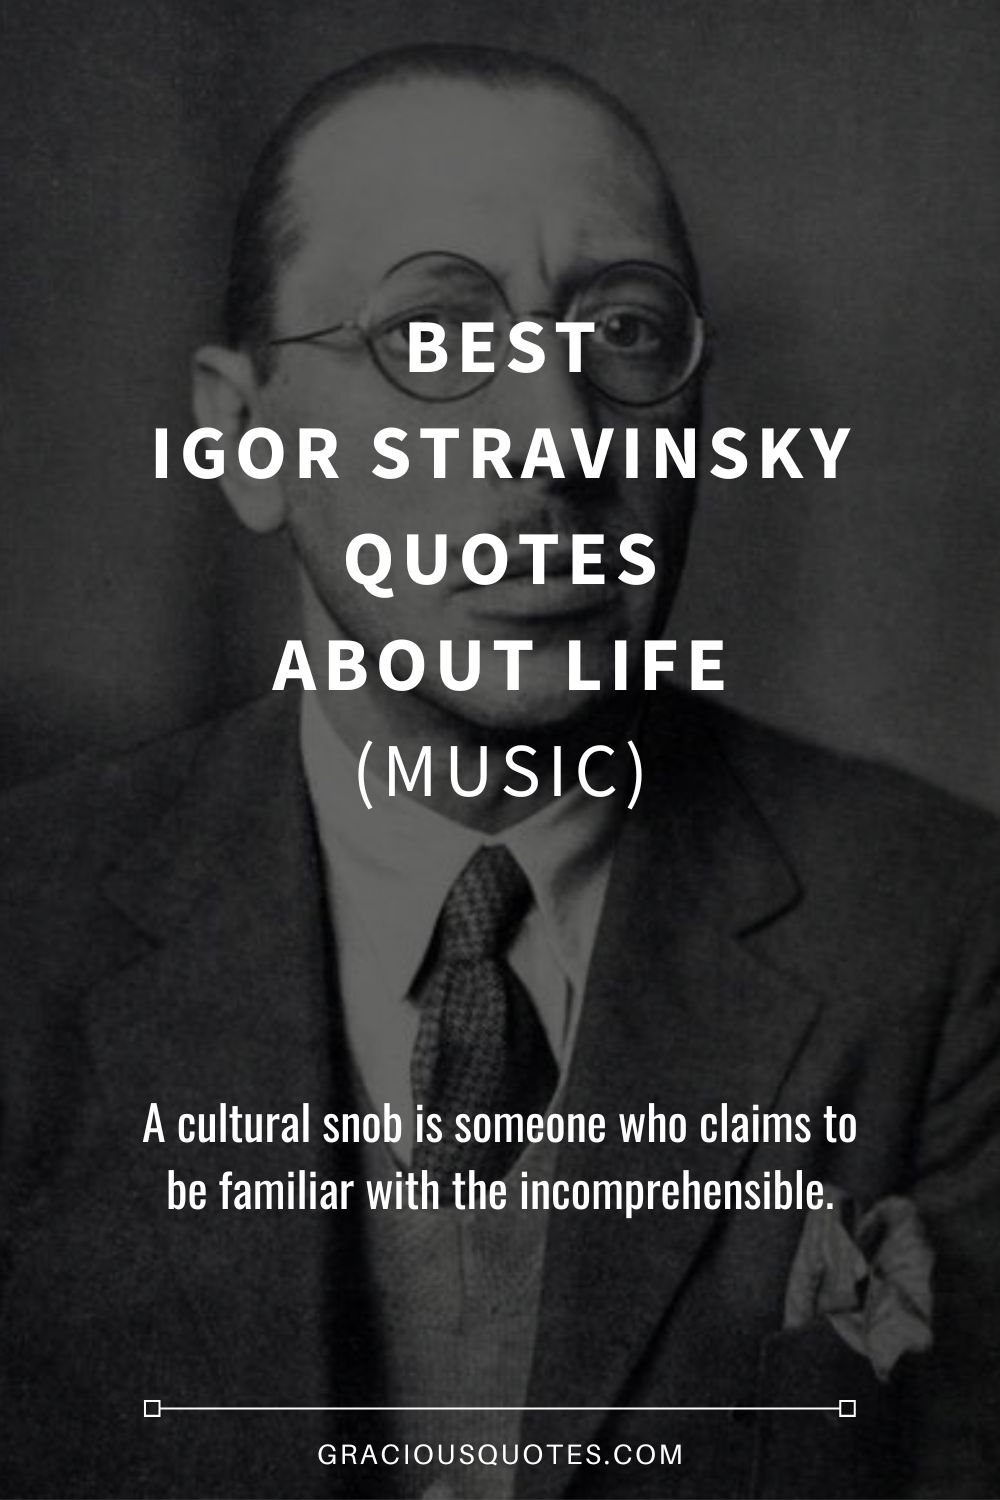 Best Igor Stravinsky Quotes About Life (MUSIC) - Gracious Quotes